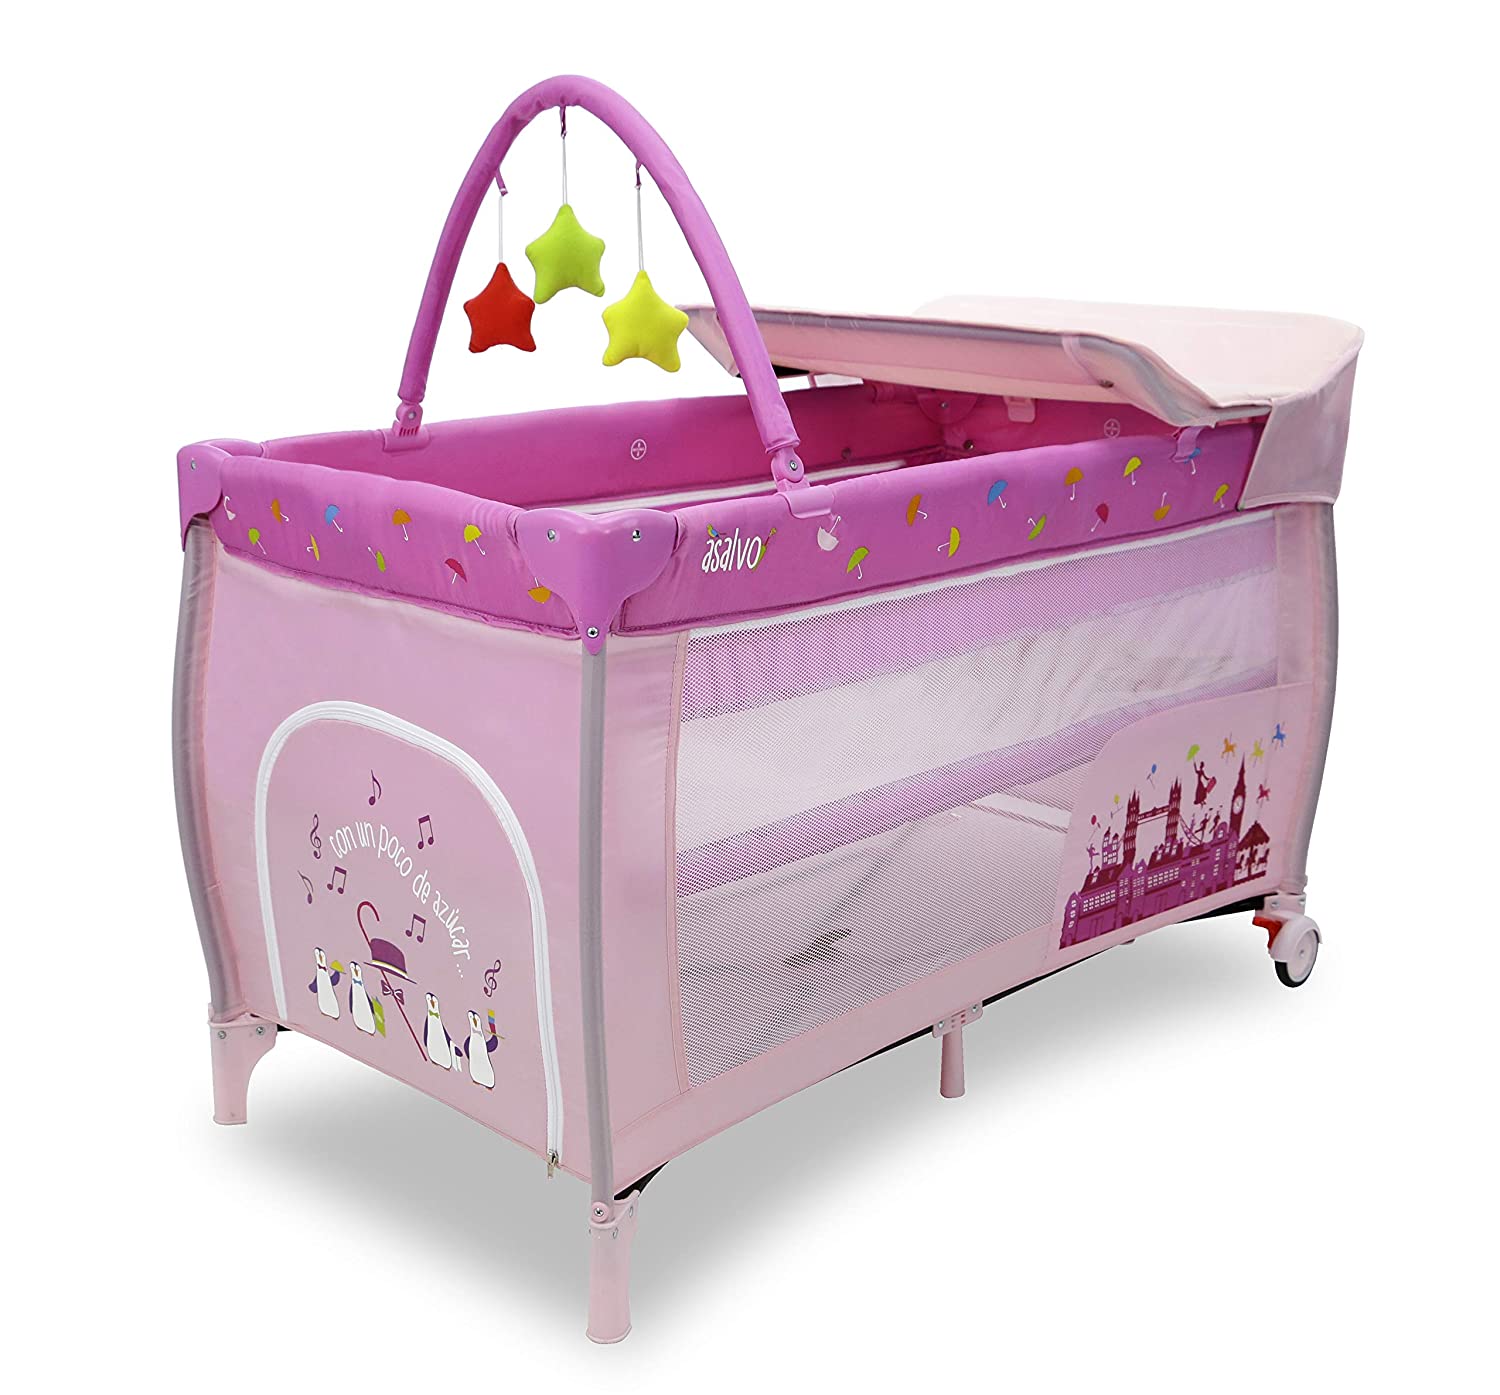 Asalvo Cribs And Travel Cots